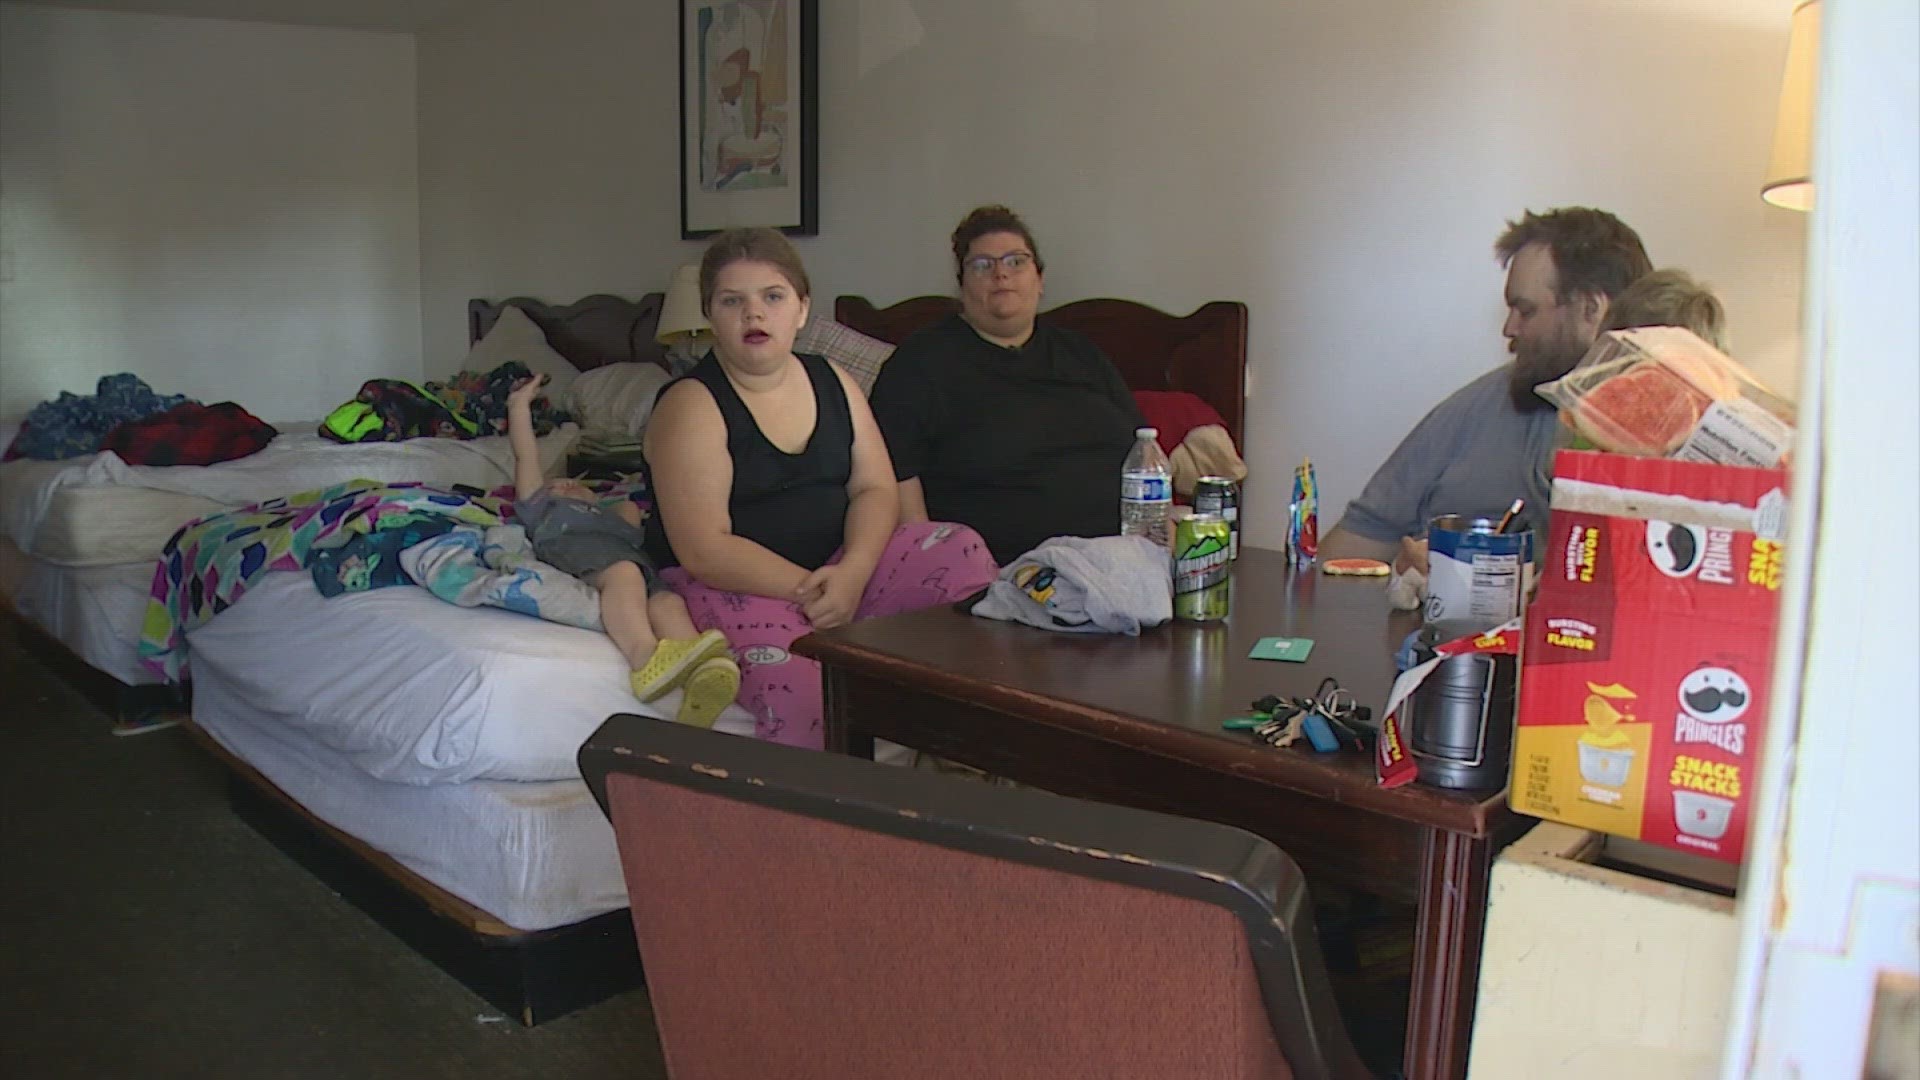 A Snohomish County family’s struggle to pull themselves out of homelessness exposes a crisis in sheltering families and the difficulties of keeping them together.